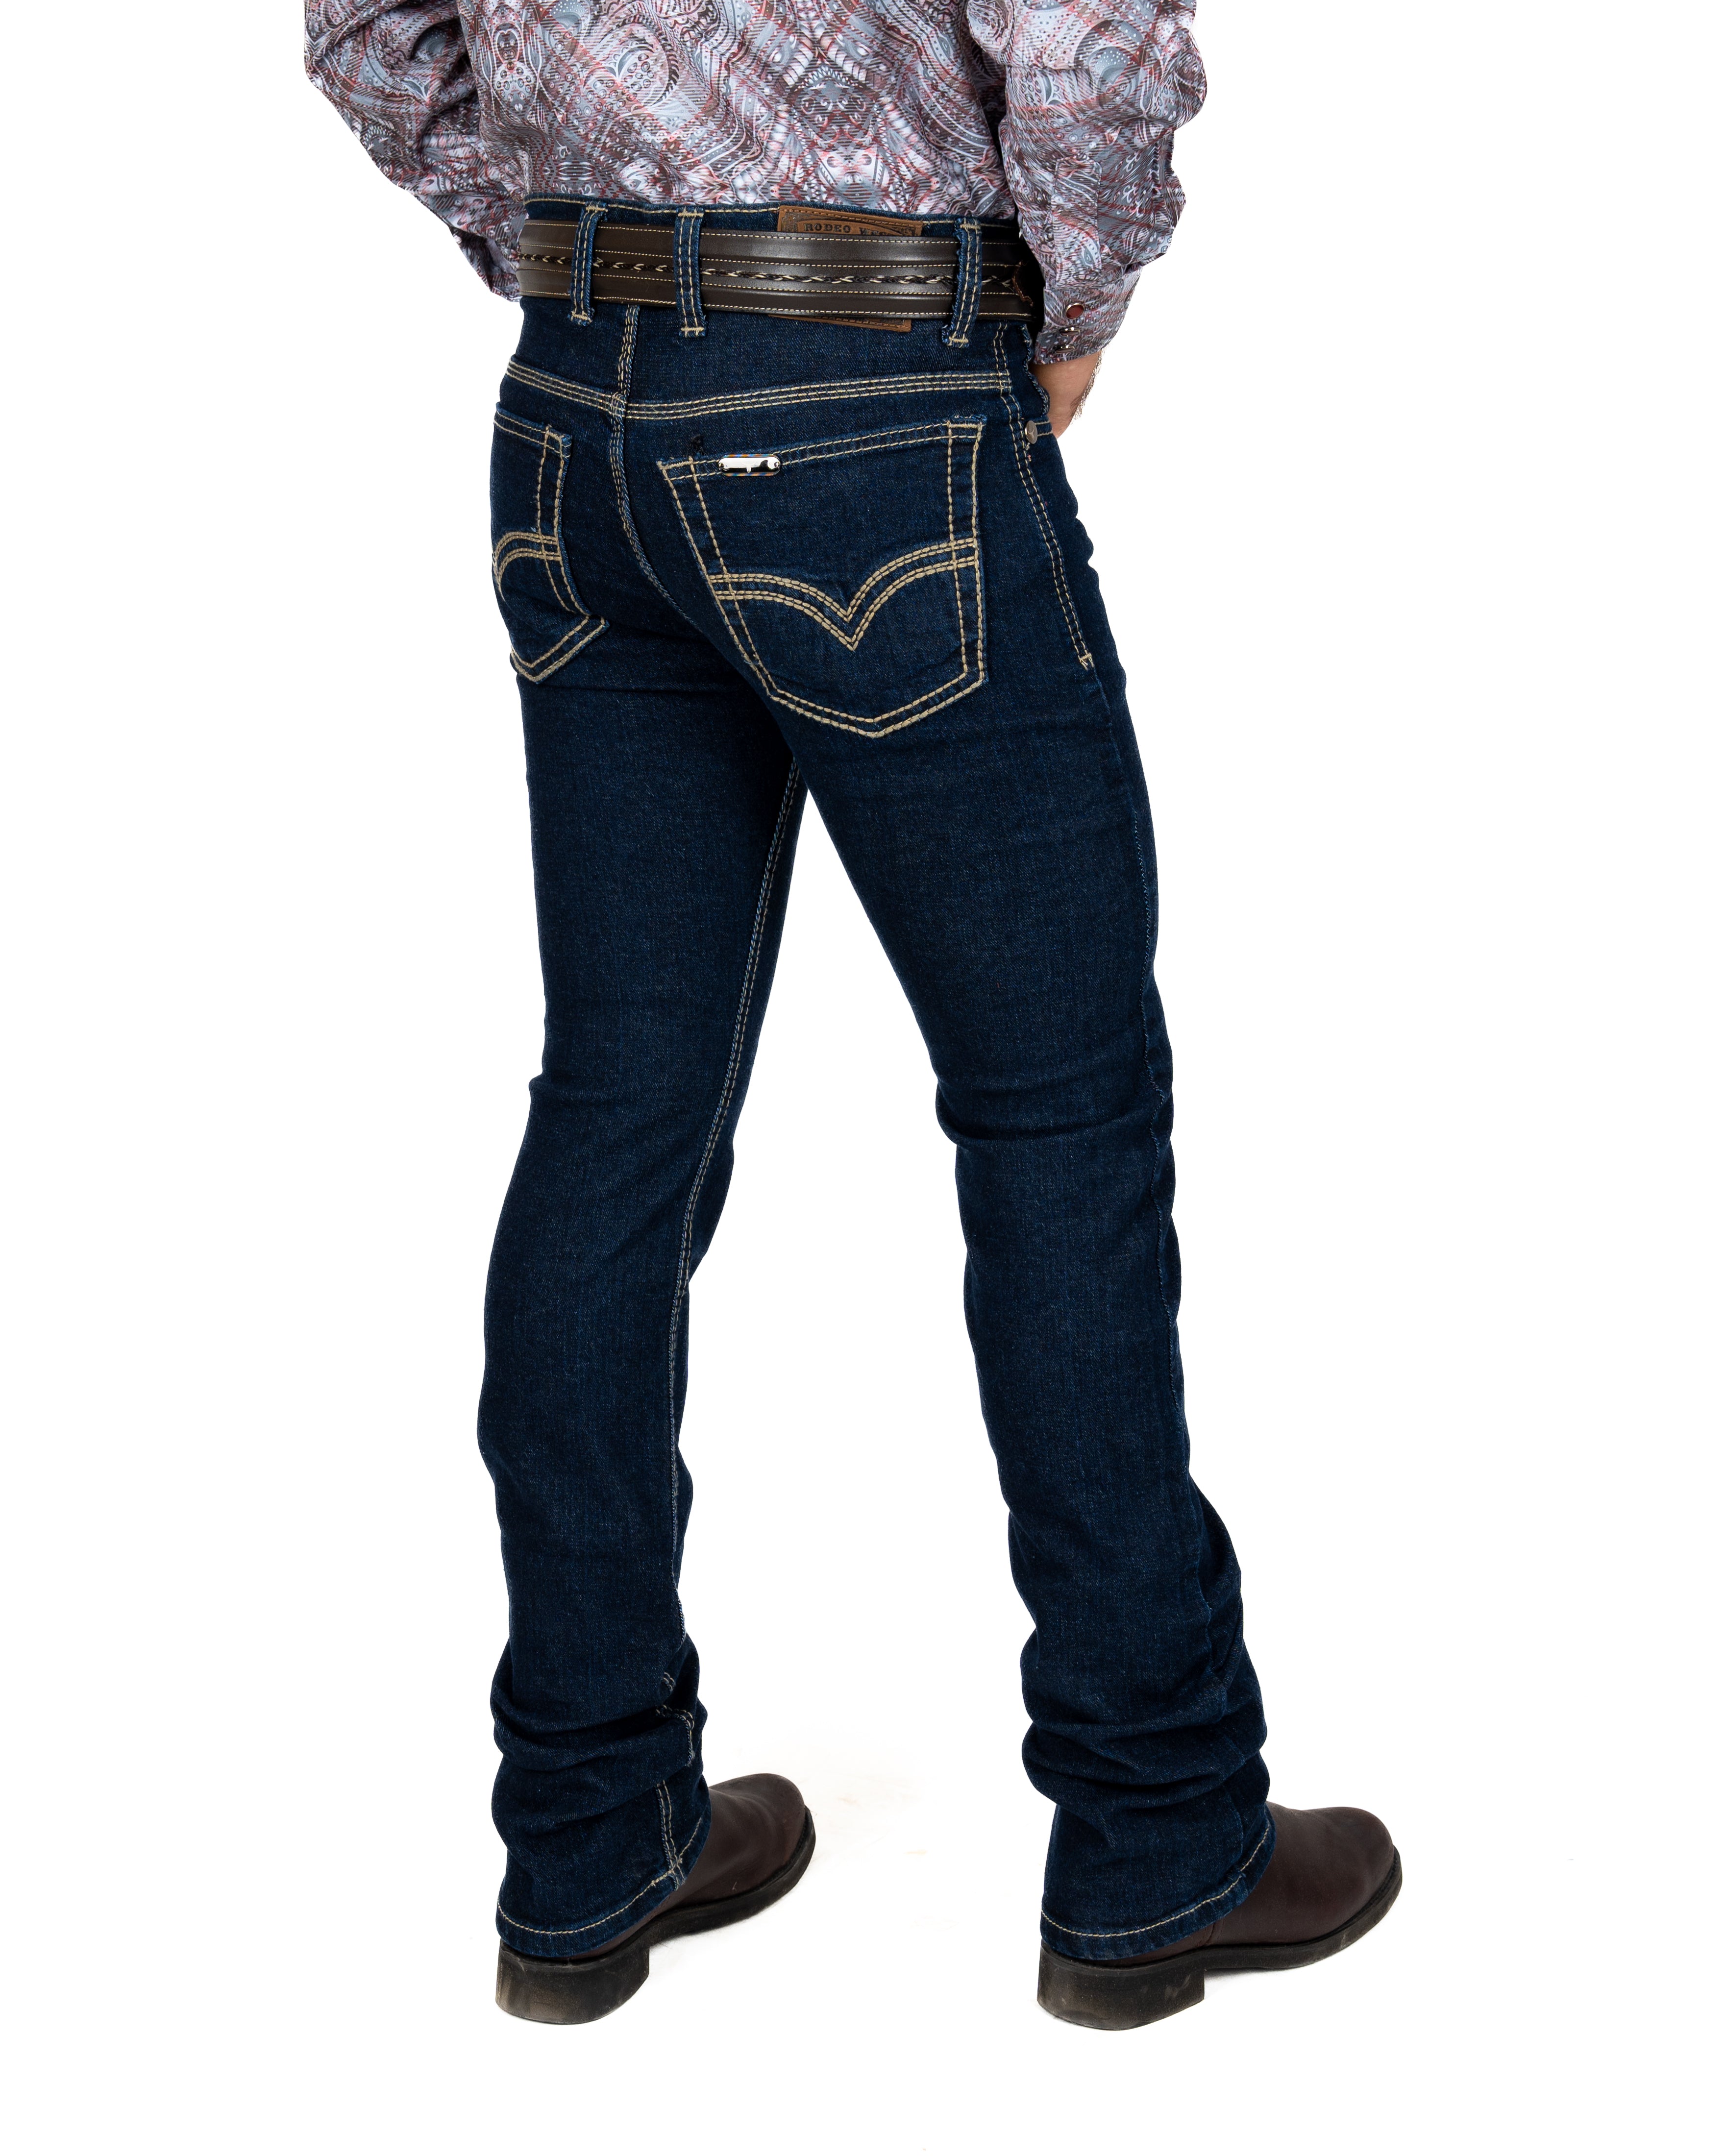 Jeans Rodeo West CB302 Caballero